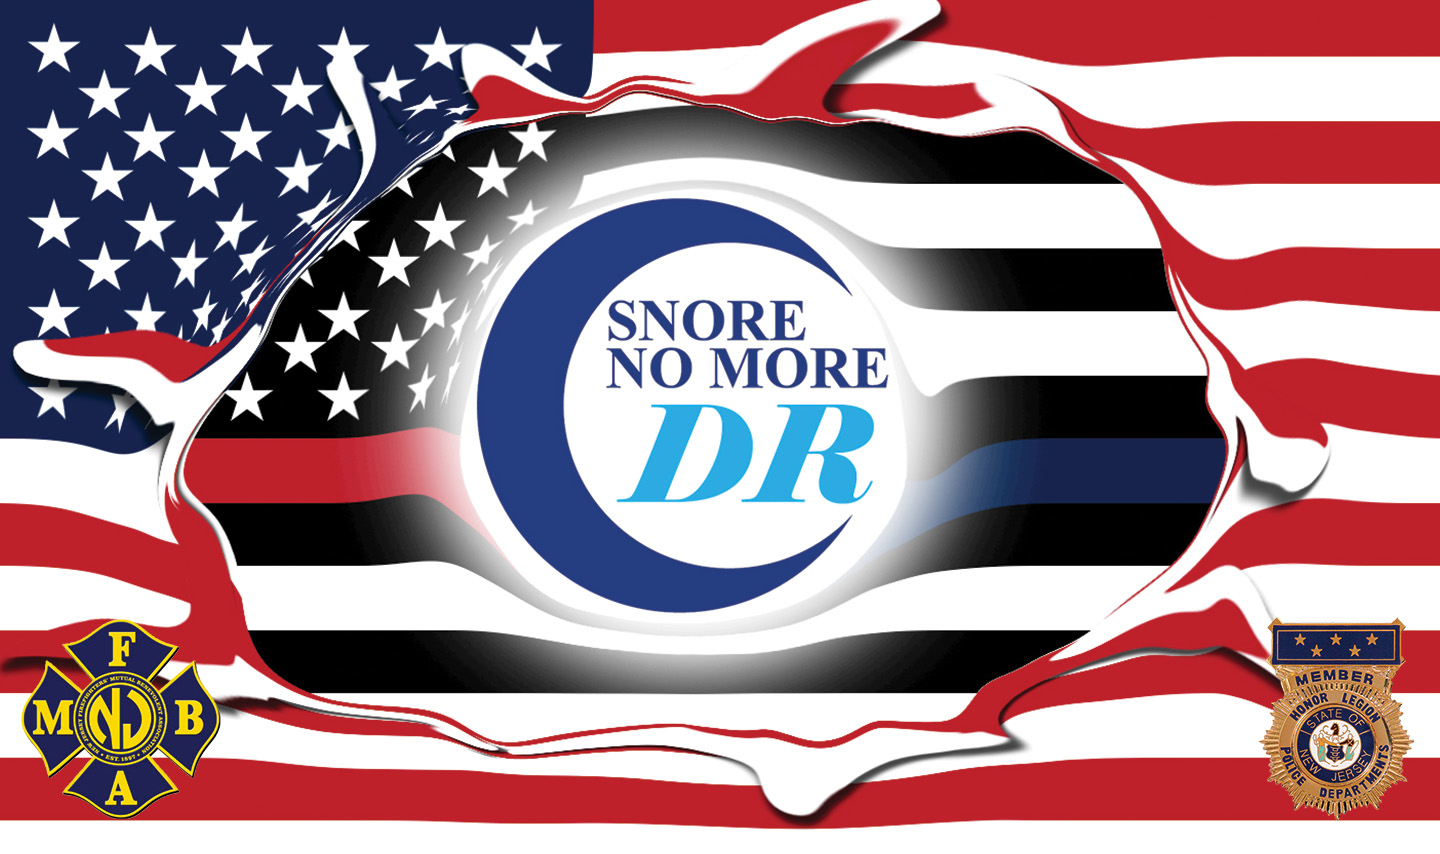 Snore No More Doctors, we are the CPAP alternative solution.